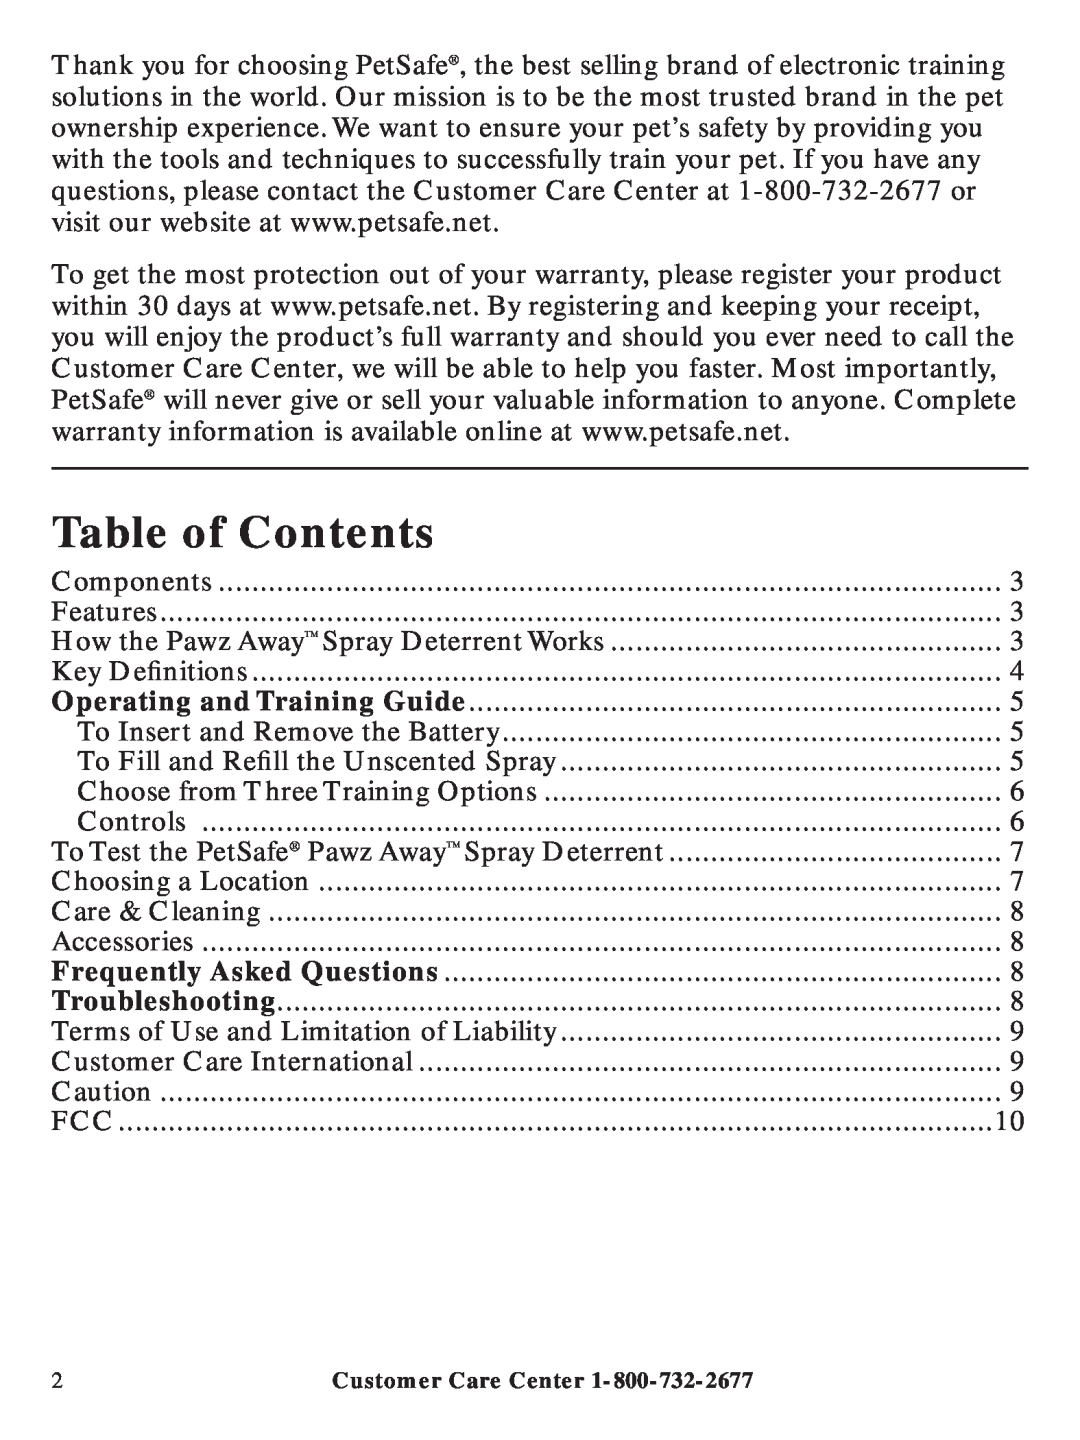 Petsafe PDT00-11312 manual Table of Contents 